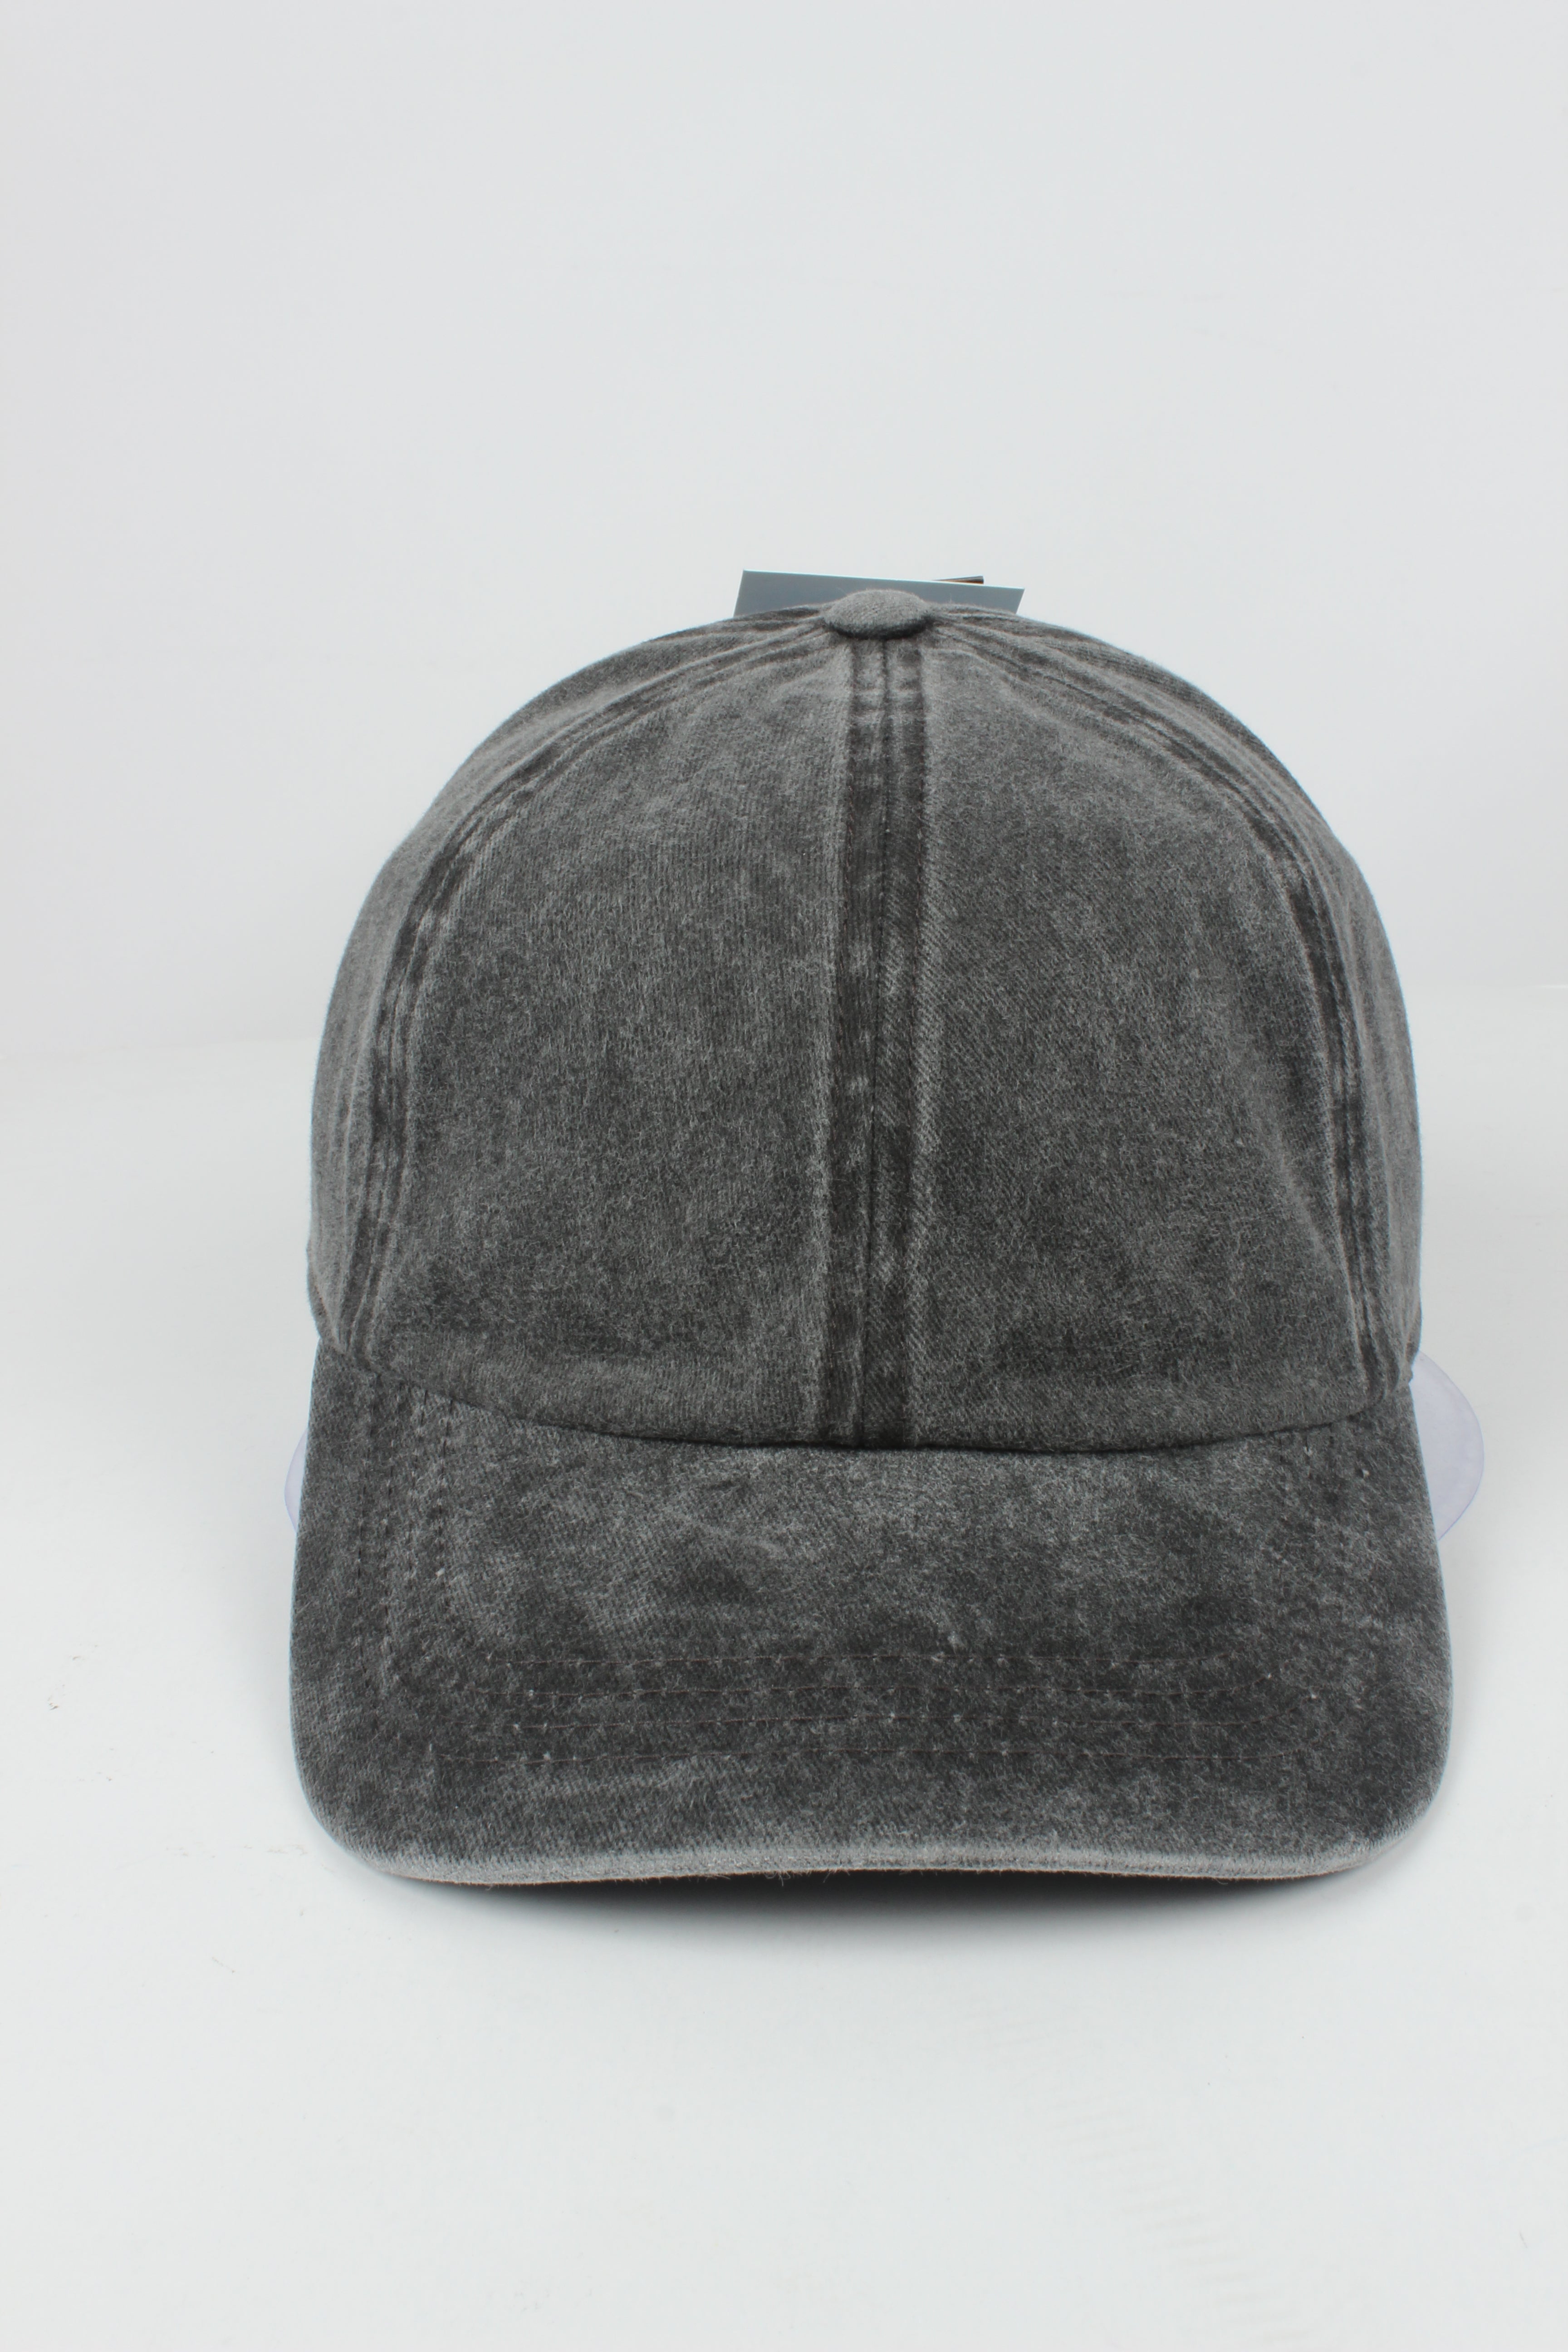 GWCAP18670 - Washed Twill 6 Panel Baseball Cap Buckle Adjustable